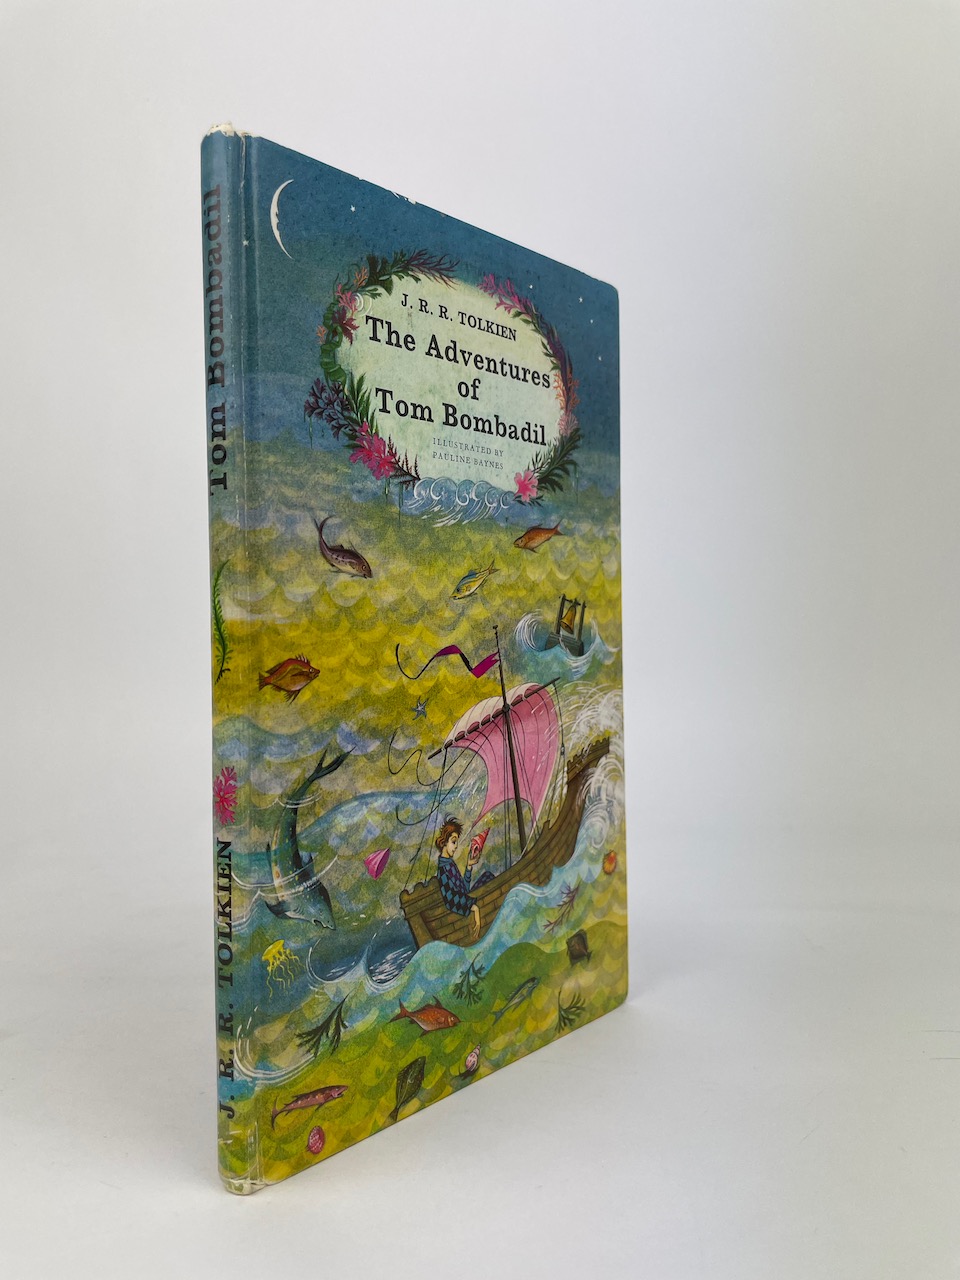 The Adventures of Tom Bombadil by J.R.R. Tolkien, illustrated by Pauline Baynes 9